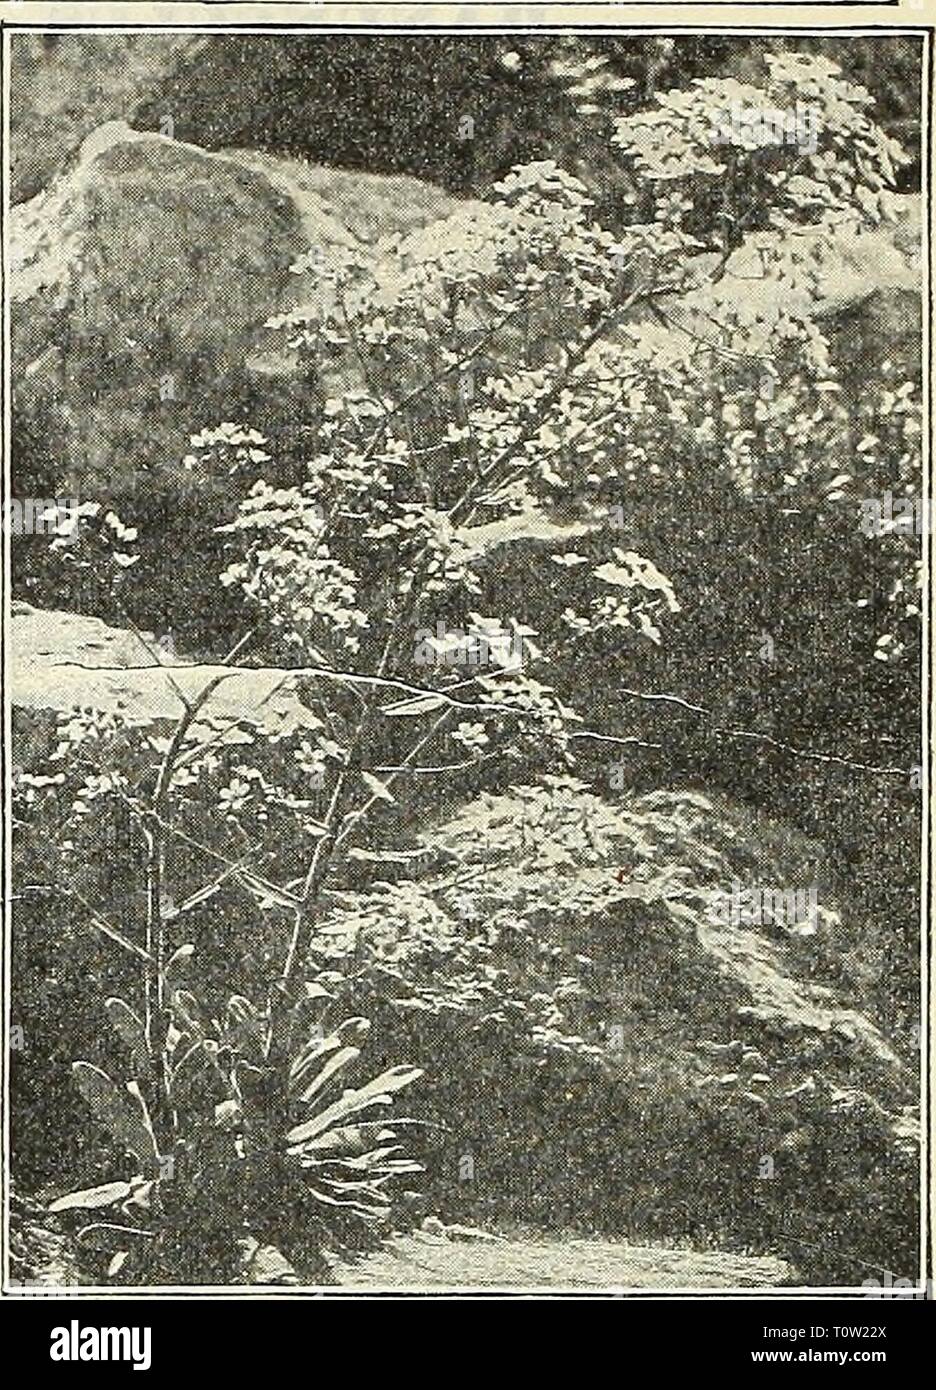 Dreer's garden book  1905 Dreer's garden book : 1905  dreersgardenbook1905henr Year: 1905  Sedum Spectabilis. Saxifraga Pykamidalis. SEDUM (Stone-crop). DWARF VARIETIES, vSuitable for the rockery, carpet bedding, etc. Acre {Golden Moss). Much used for covering graves, foliage green, flowers bright yellow. Album. Green foliage, white flowers. Lydium Aureum. Small yellow loliage and pink flowers. — Glaucum. Small glaucous green foliage and pink flowers. Pulchellum {Birds'-foot Stone- (rop). Foliage red and brown, rosy- purple flowers. Sexangulare. Dark green foliage and yellow flowers. Spurium.  Stock Photo